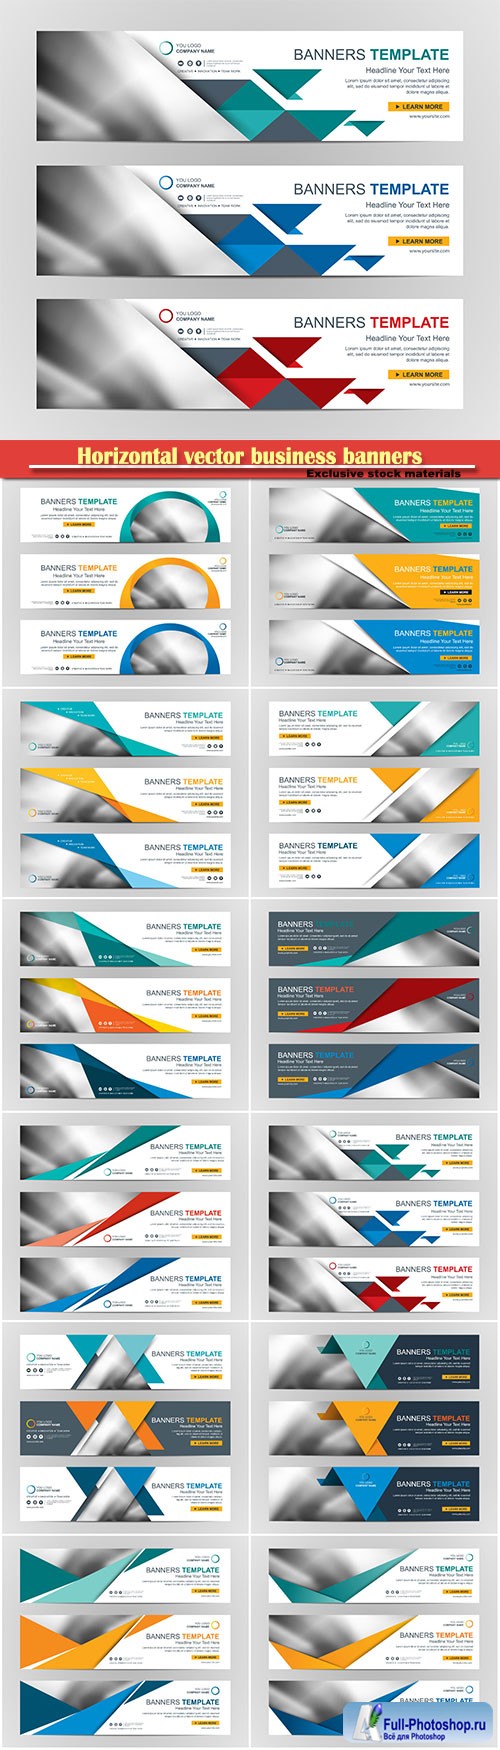 Horizontal vector business banners # 2